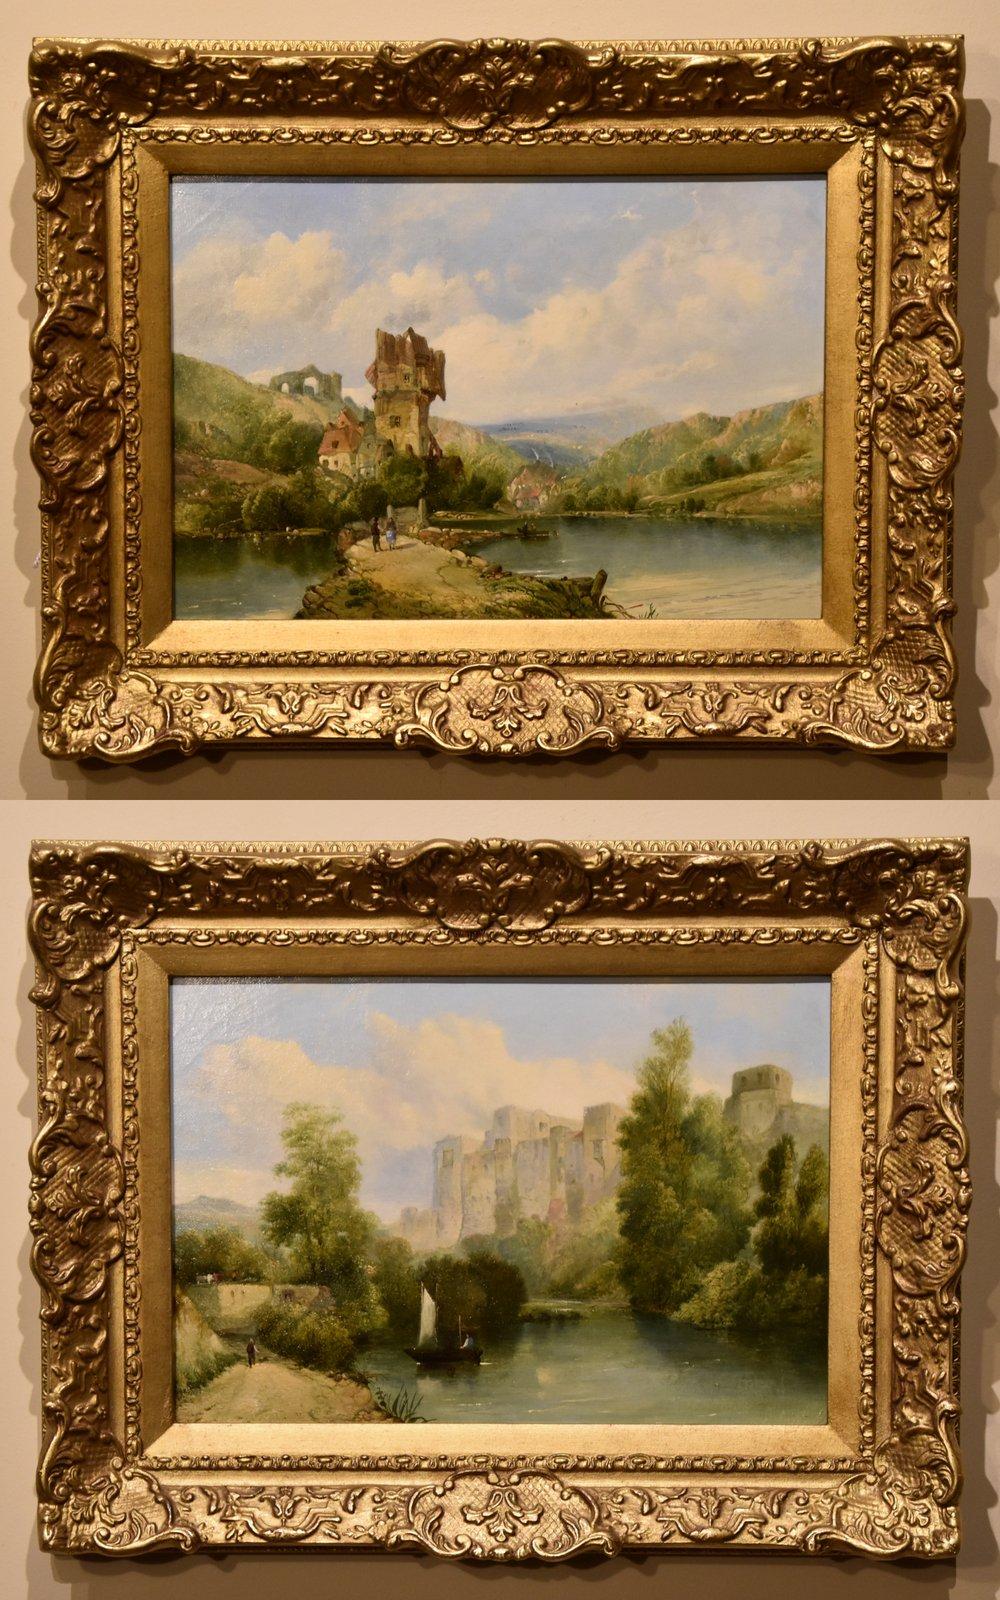 "Continental River Views" Pair by Alfred Henry Vickers 1836-1919. He was a popular painter of rustic landscapes and continental river scenes. The grandson of Alfred Vickers senior. Both oil on canvas. One signed.

Dimensions unframed:
height 9" x